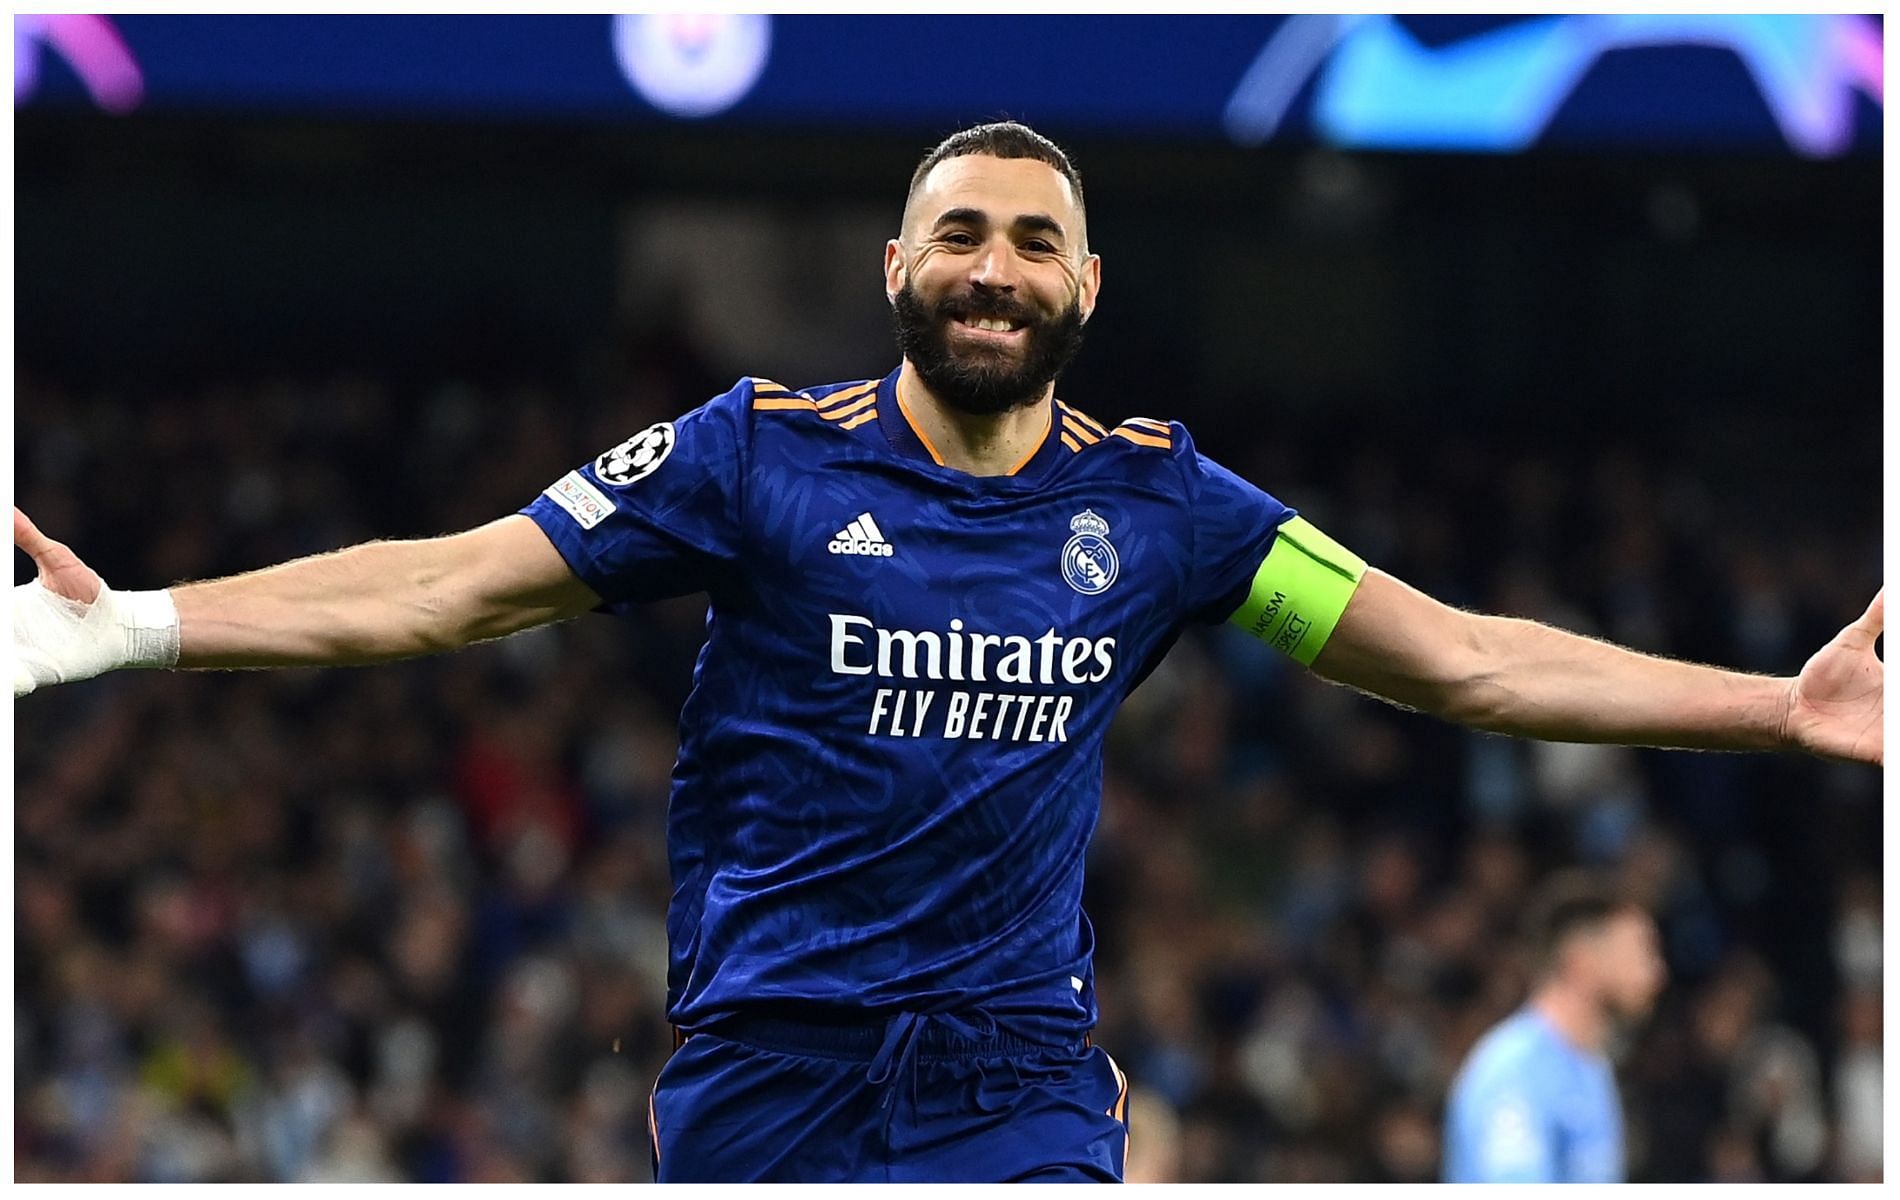 Karim Benzema is one of the best footballers in the world right now (Image via Getty)